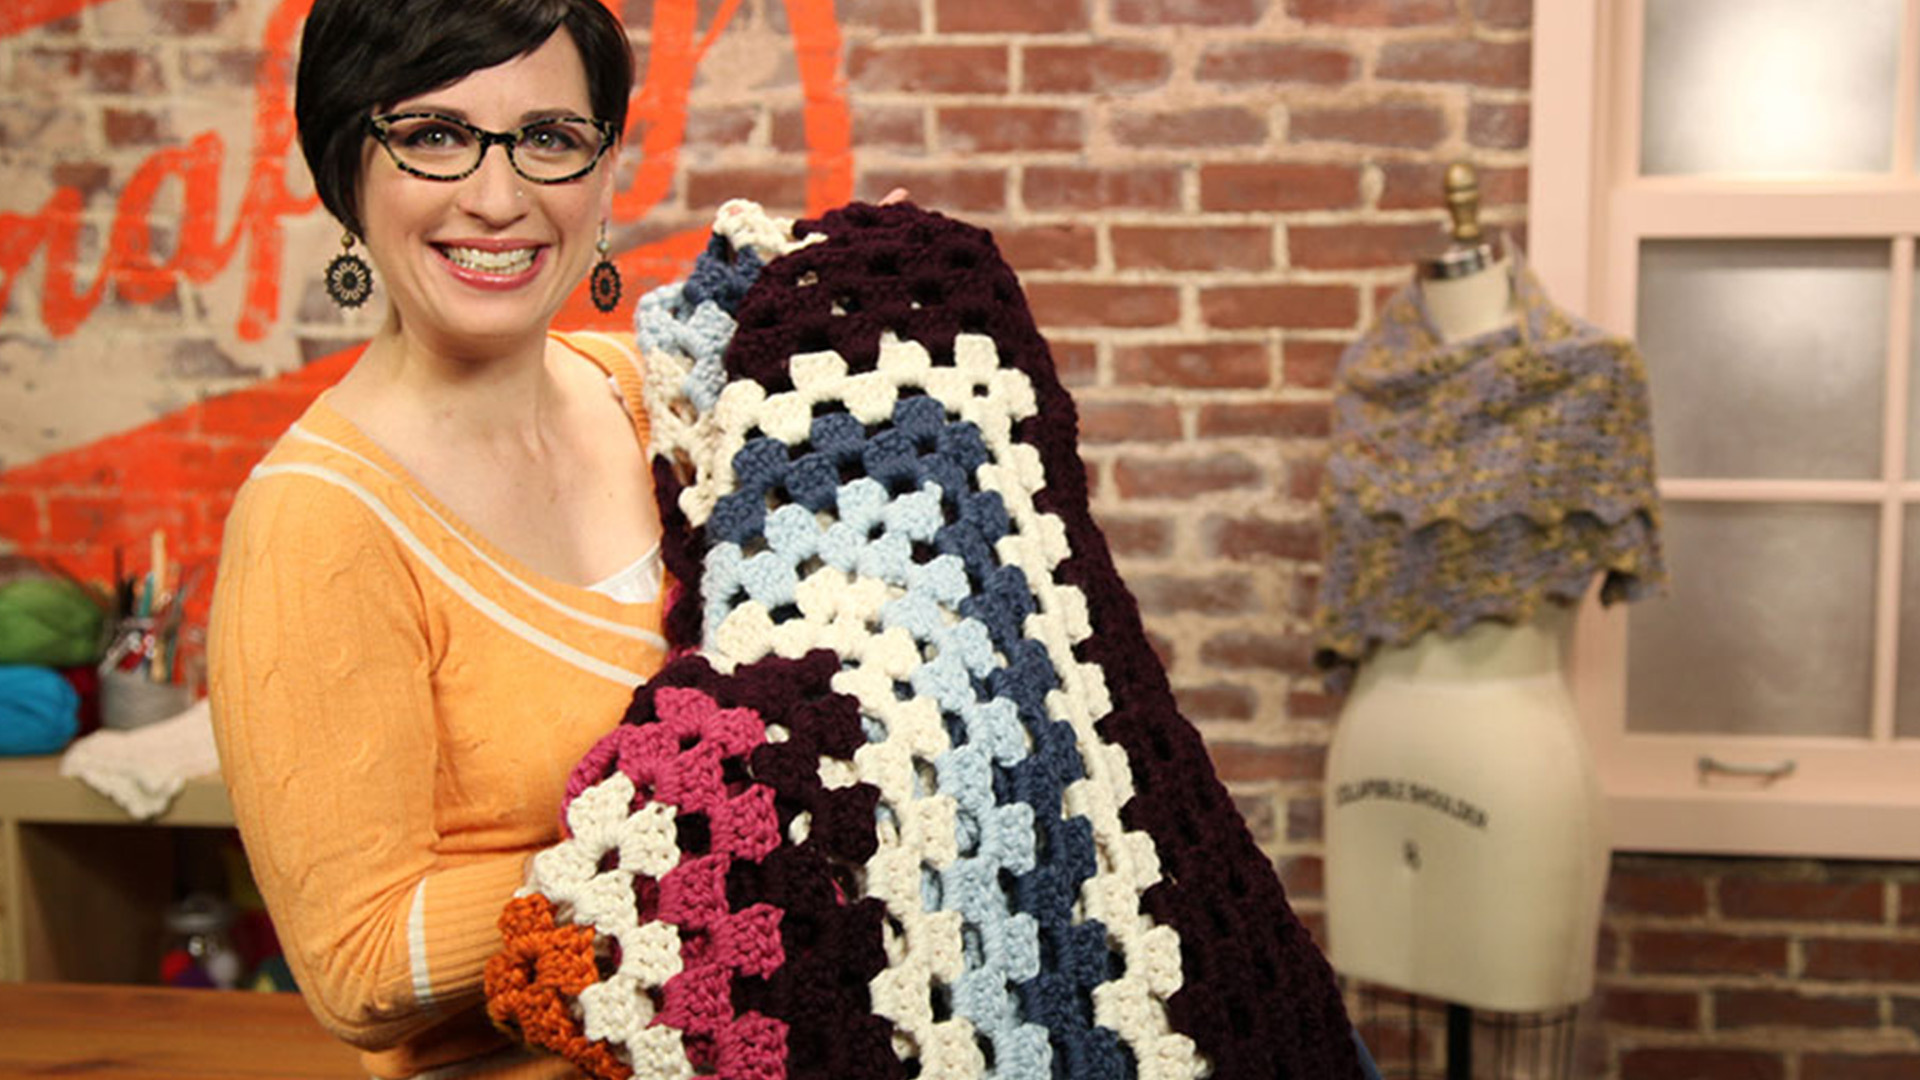 7 of the Best Crochet Books You'll Definitely Want to Own